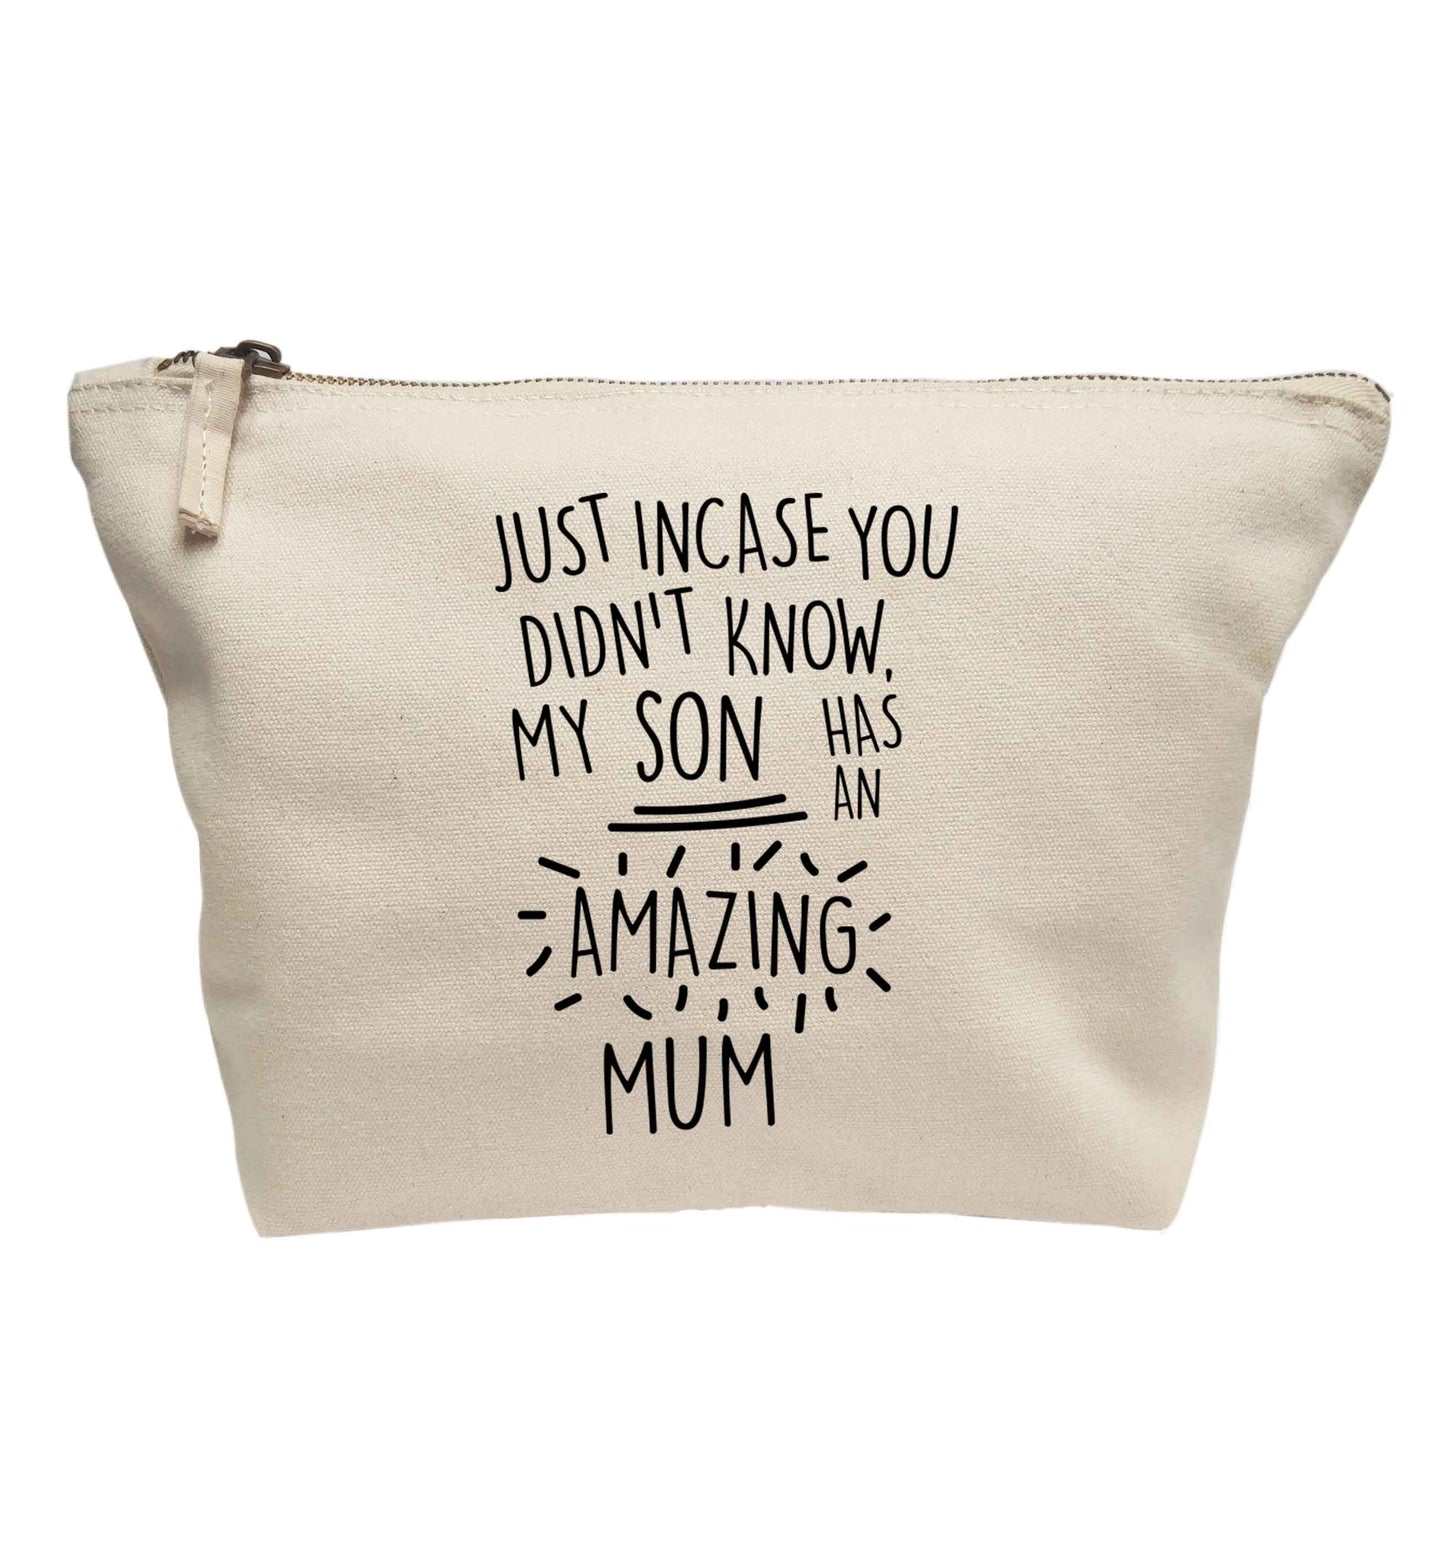 Just incase you didn't know my son has an amazing mum | Makeup / wash bag